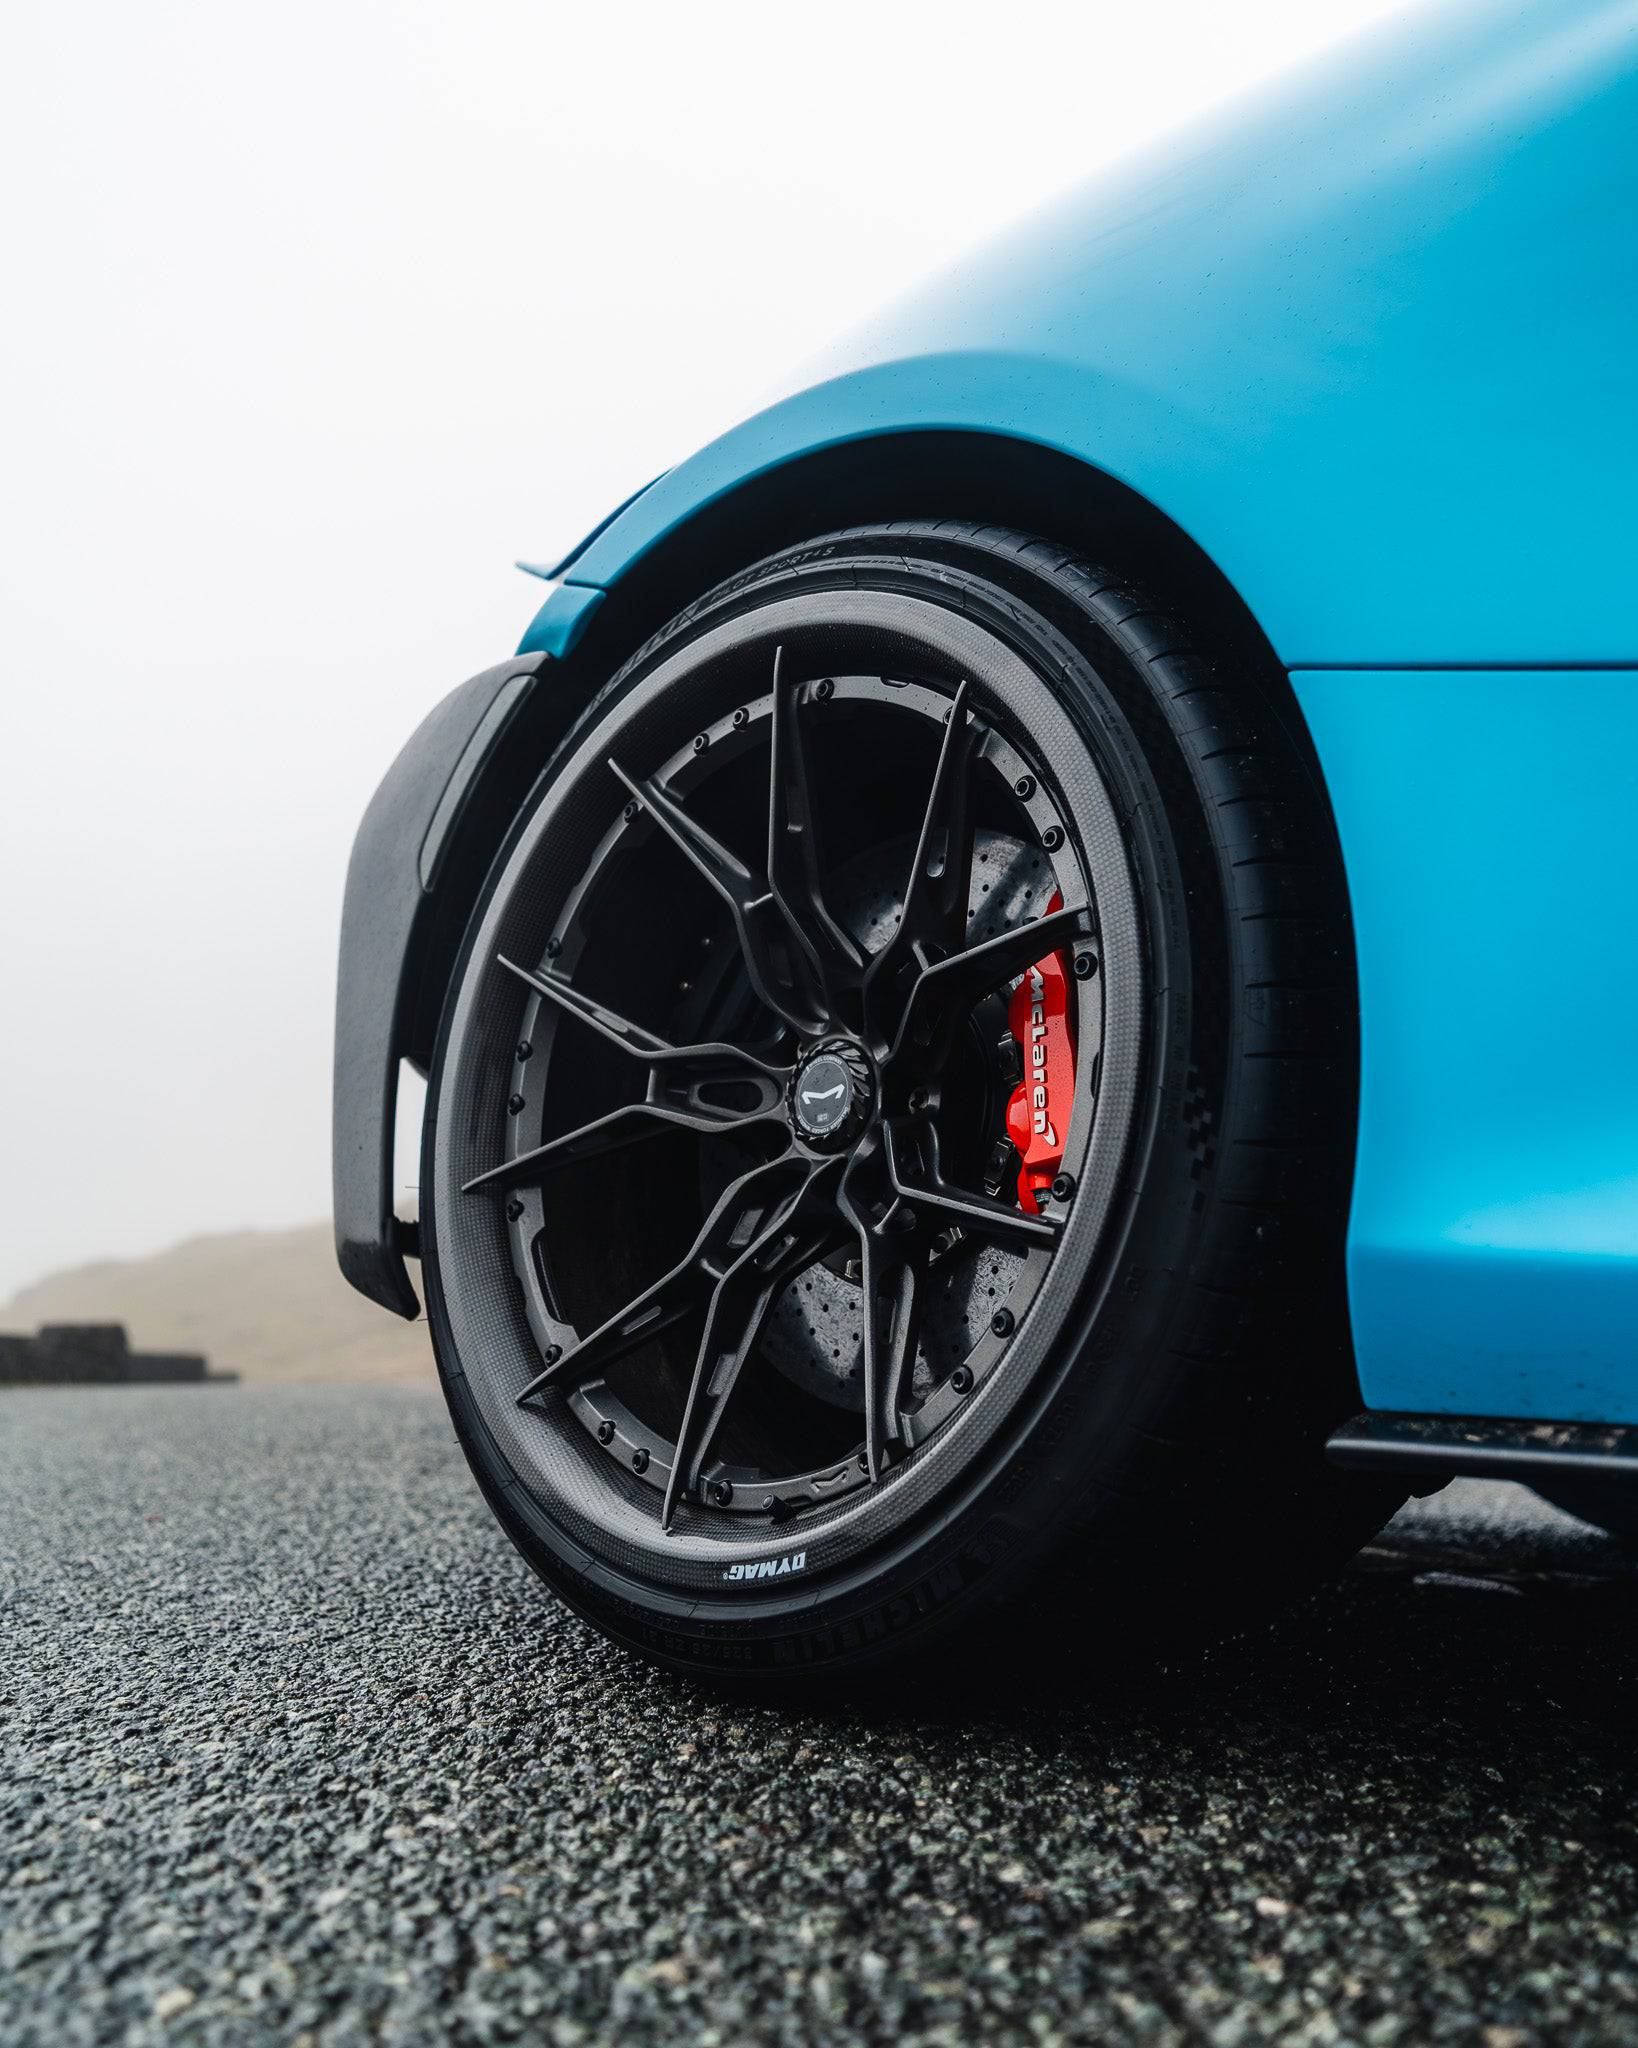 Dillinger x Dymag LF1 Forged Wheels, Forged Wheels, Dillinger Wheels - AUTOID | Premium Automotive Accessories